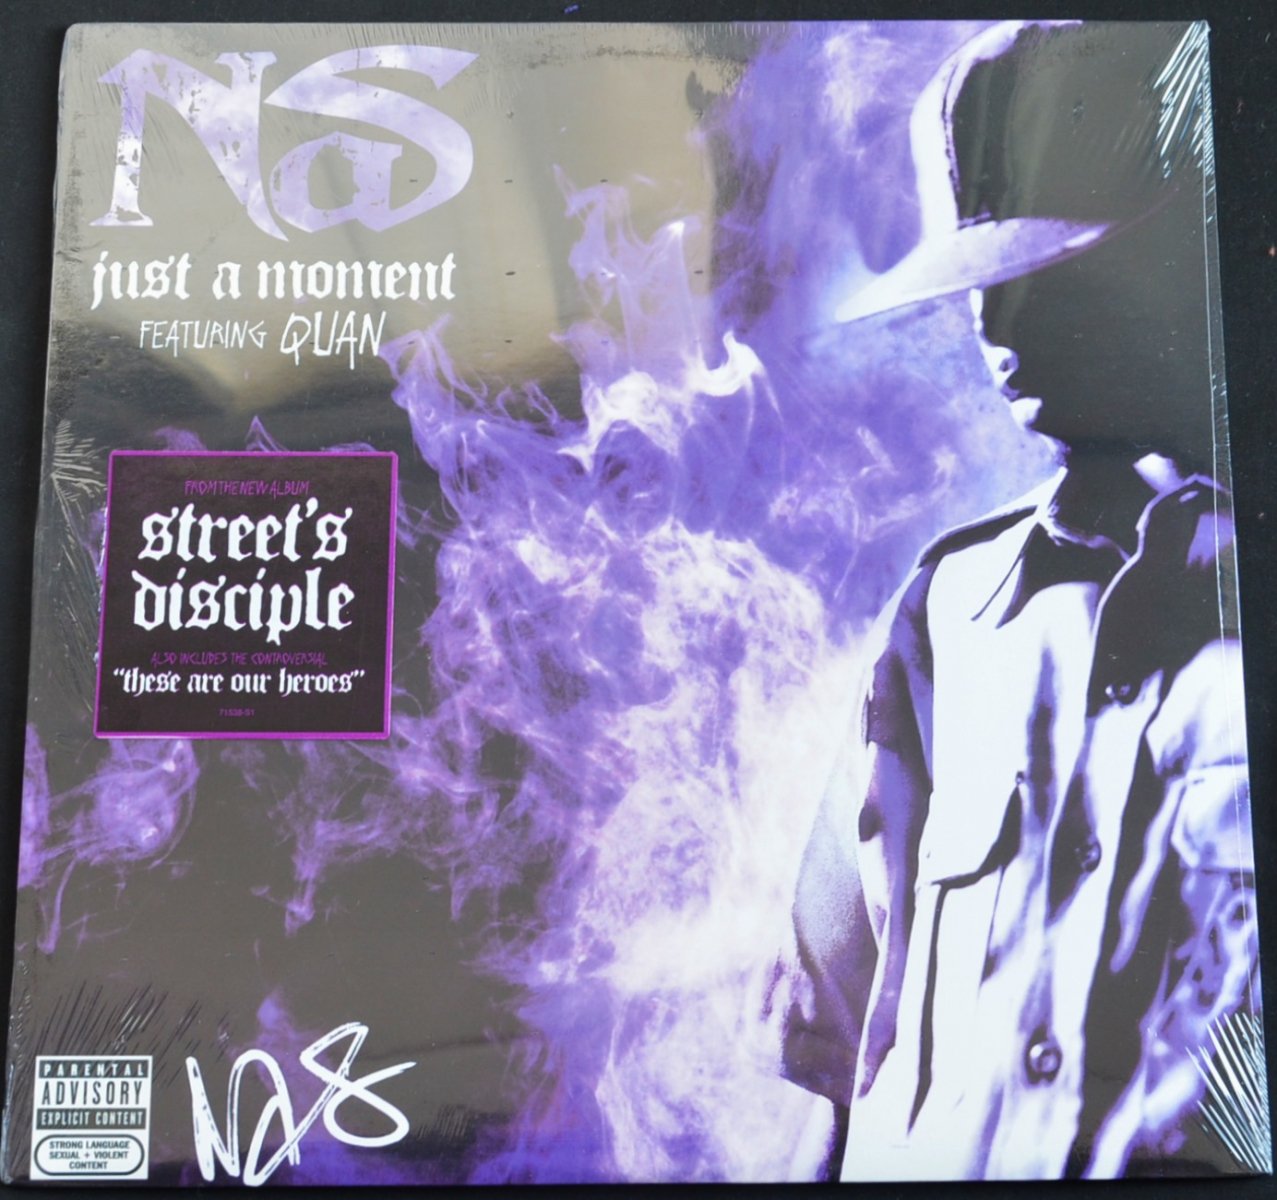 NAS / JUST A MOMENT (PROD BY L.E.S.) / THESE ARE OUR HEROES (PROD BY BUCKWILD) (12